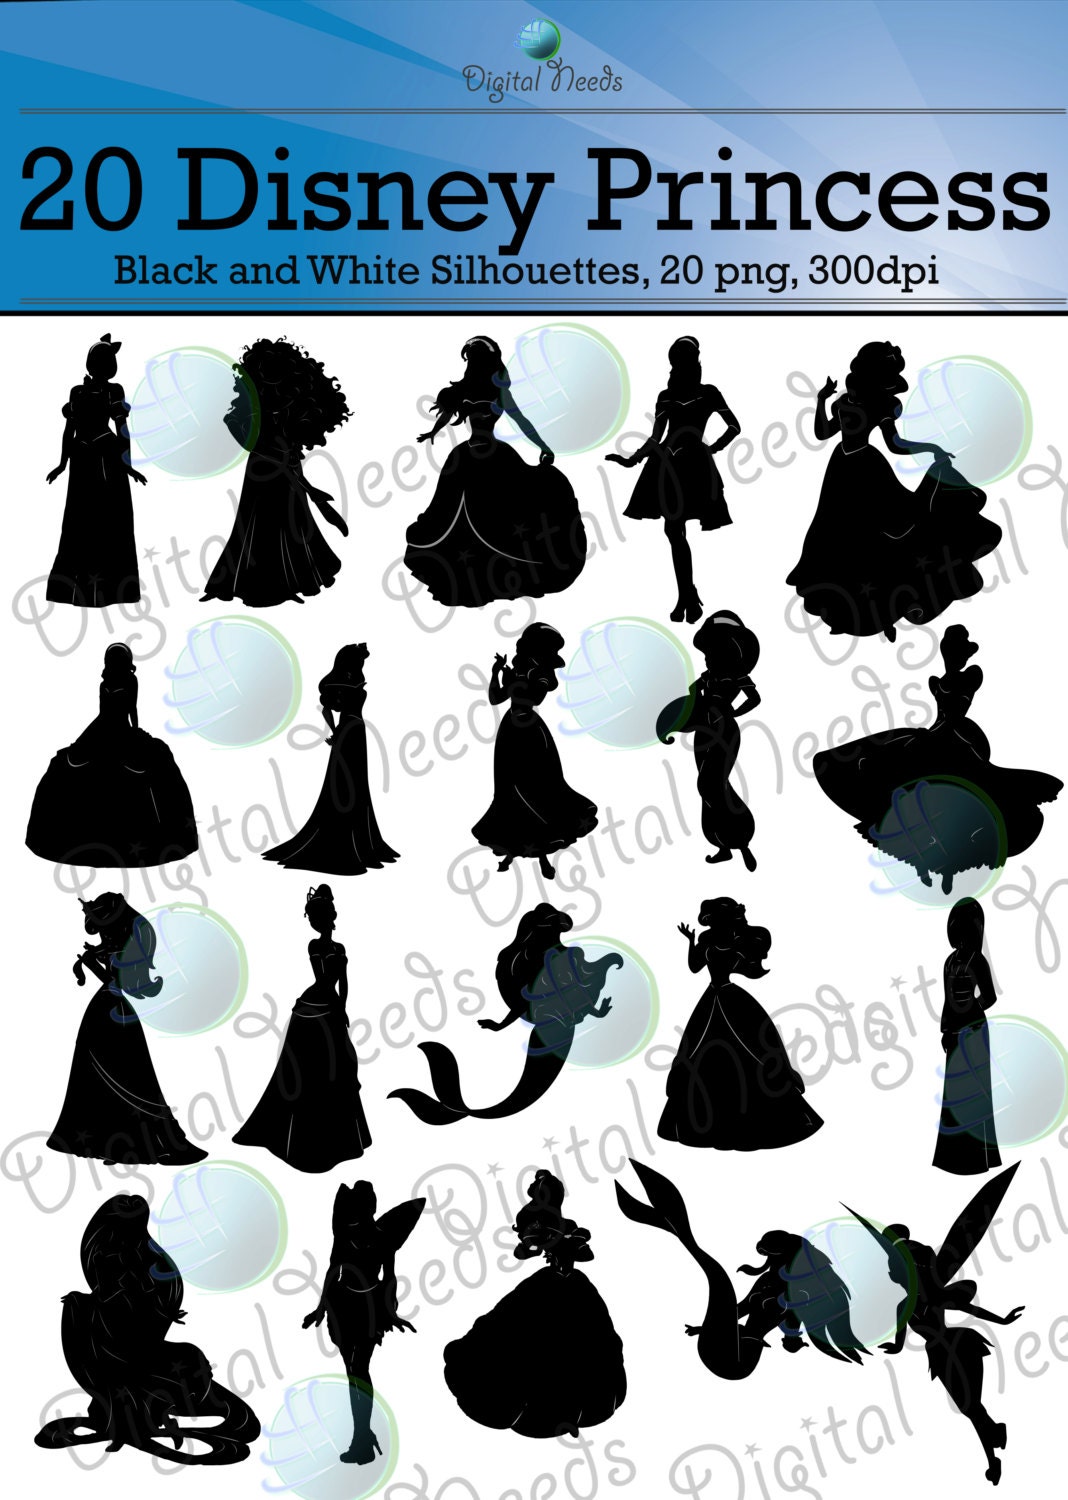 95 Silhouettes 20 Disney Princesses 25 By Digitalneeds On Etsy 